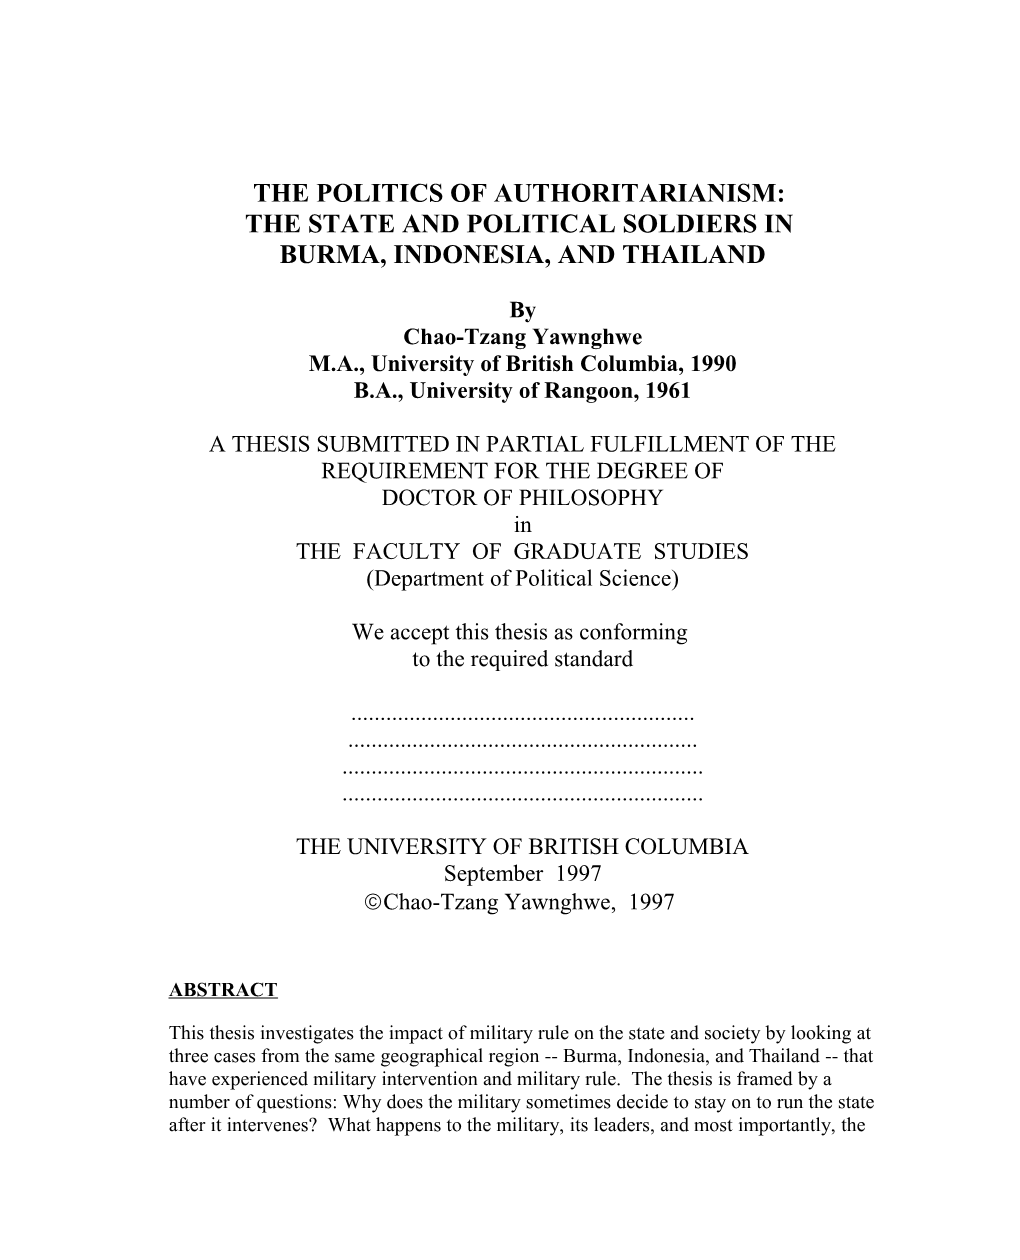 The Politics of Authoritarianism: the State And